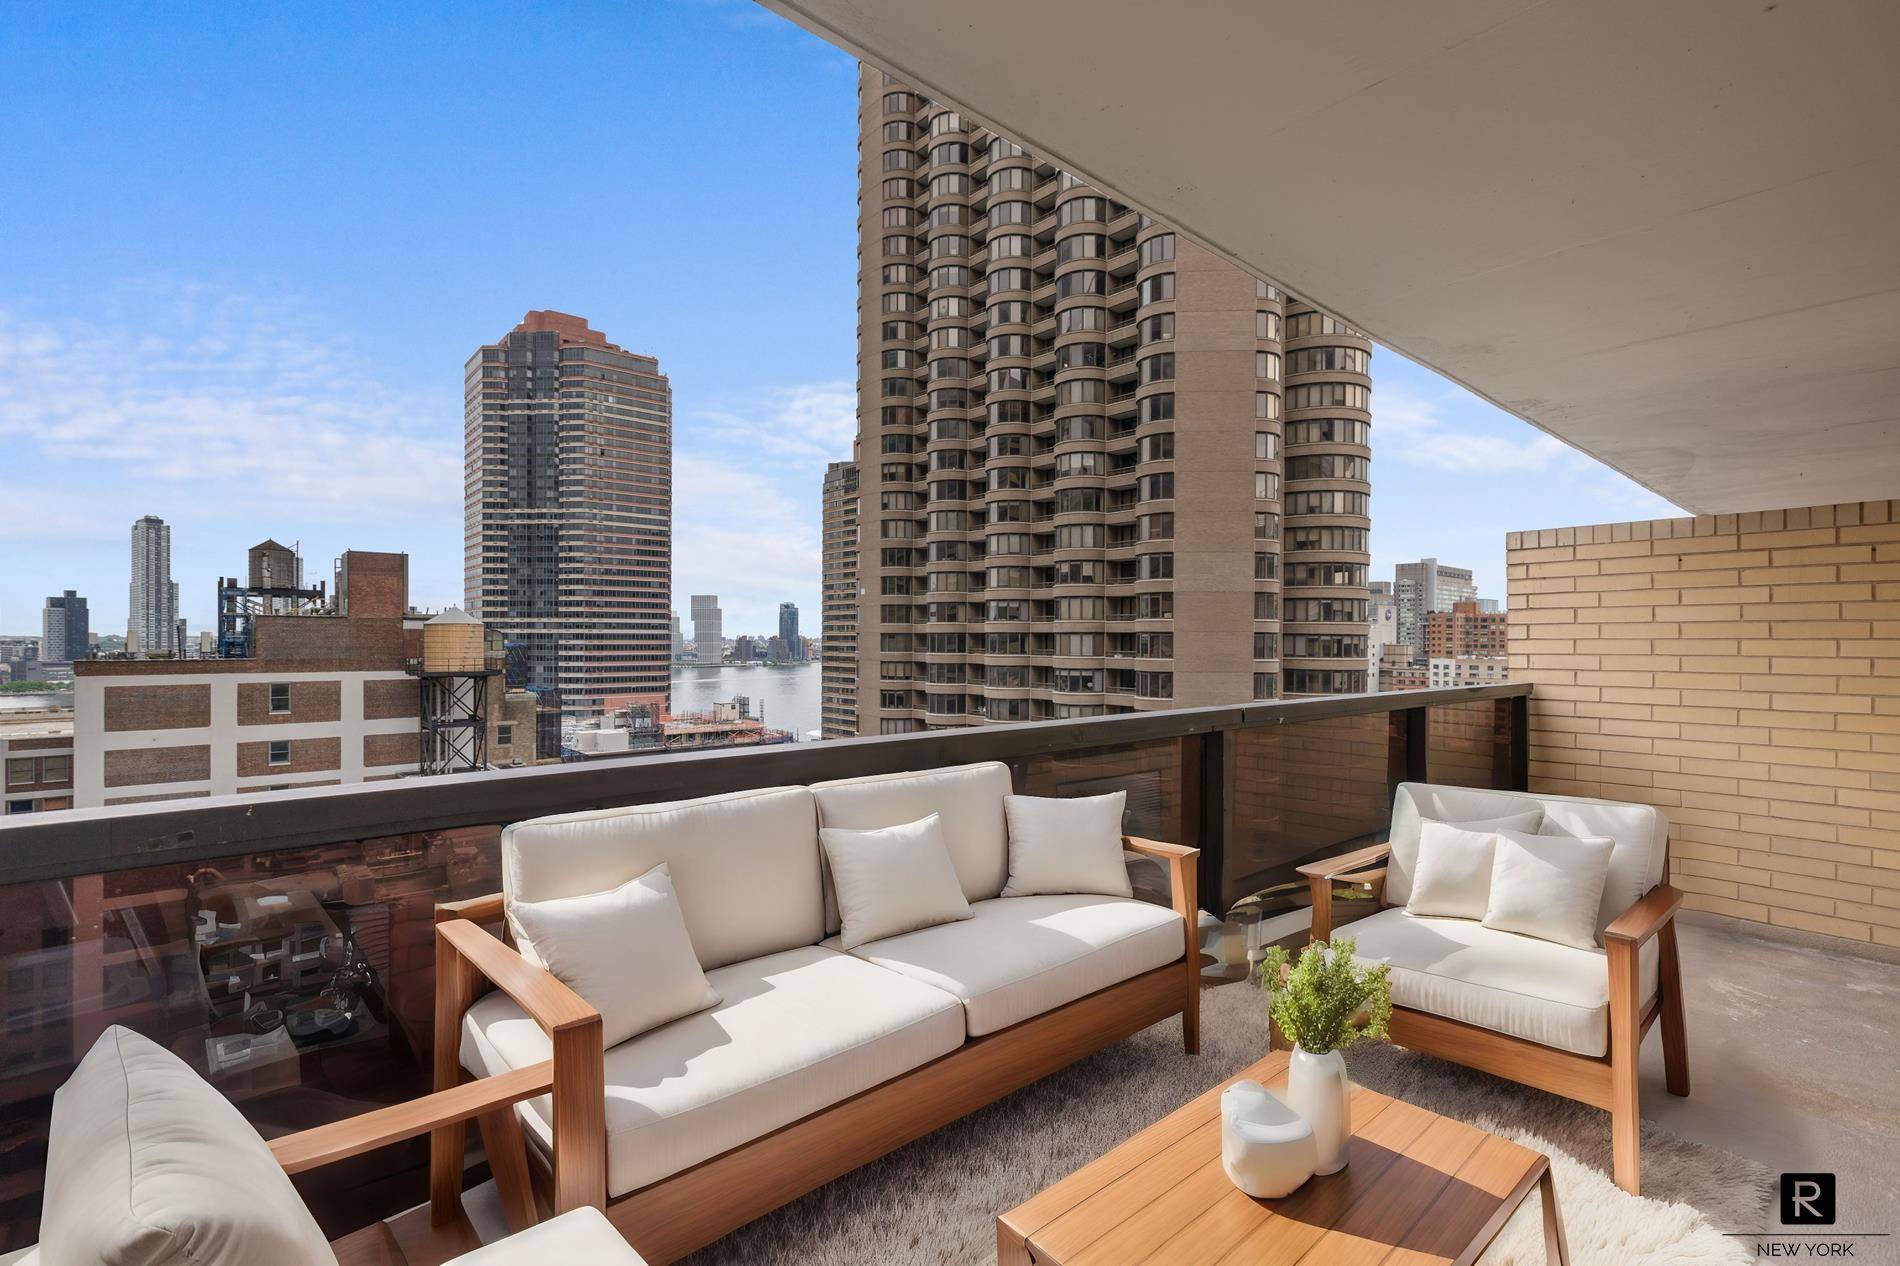 Immerse yourself in luxury living at The Whitney Condominium in this one bedroom apartment featuring a spacious private terrace boasting East River views.